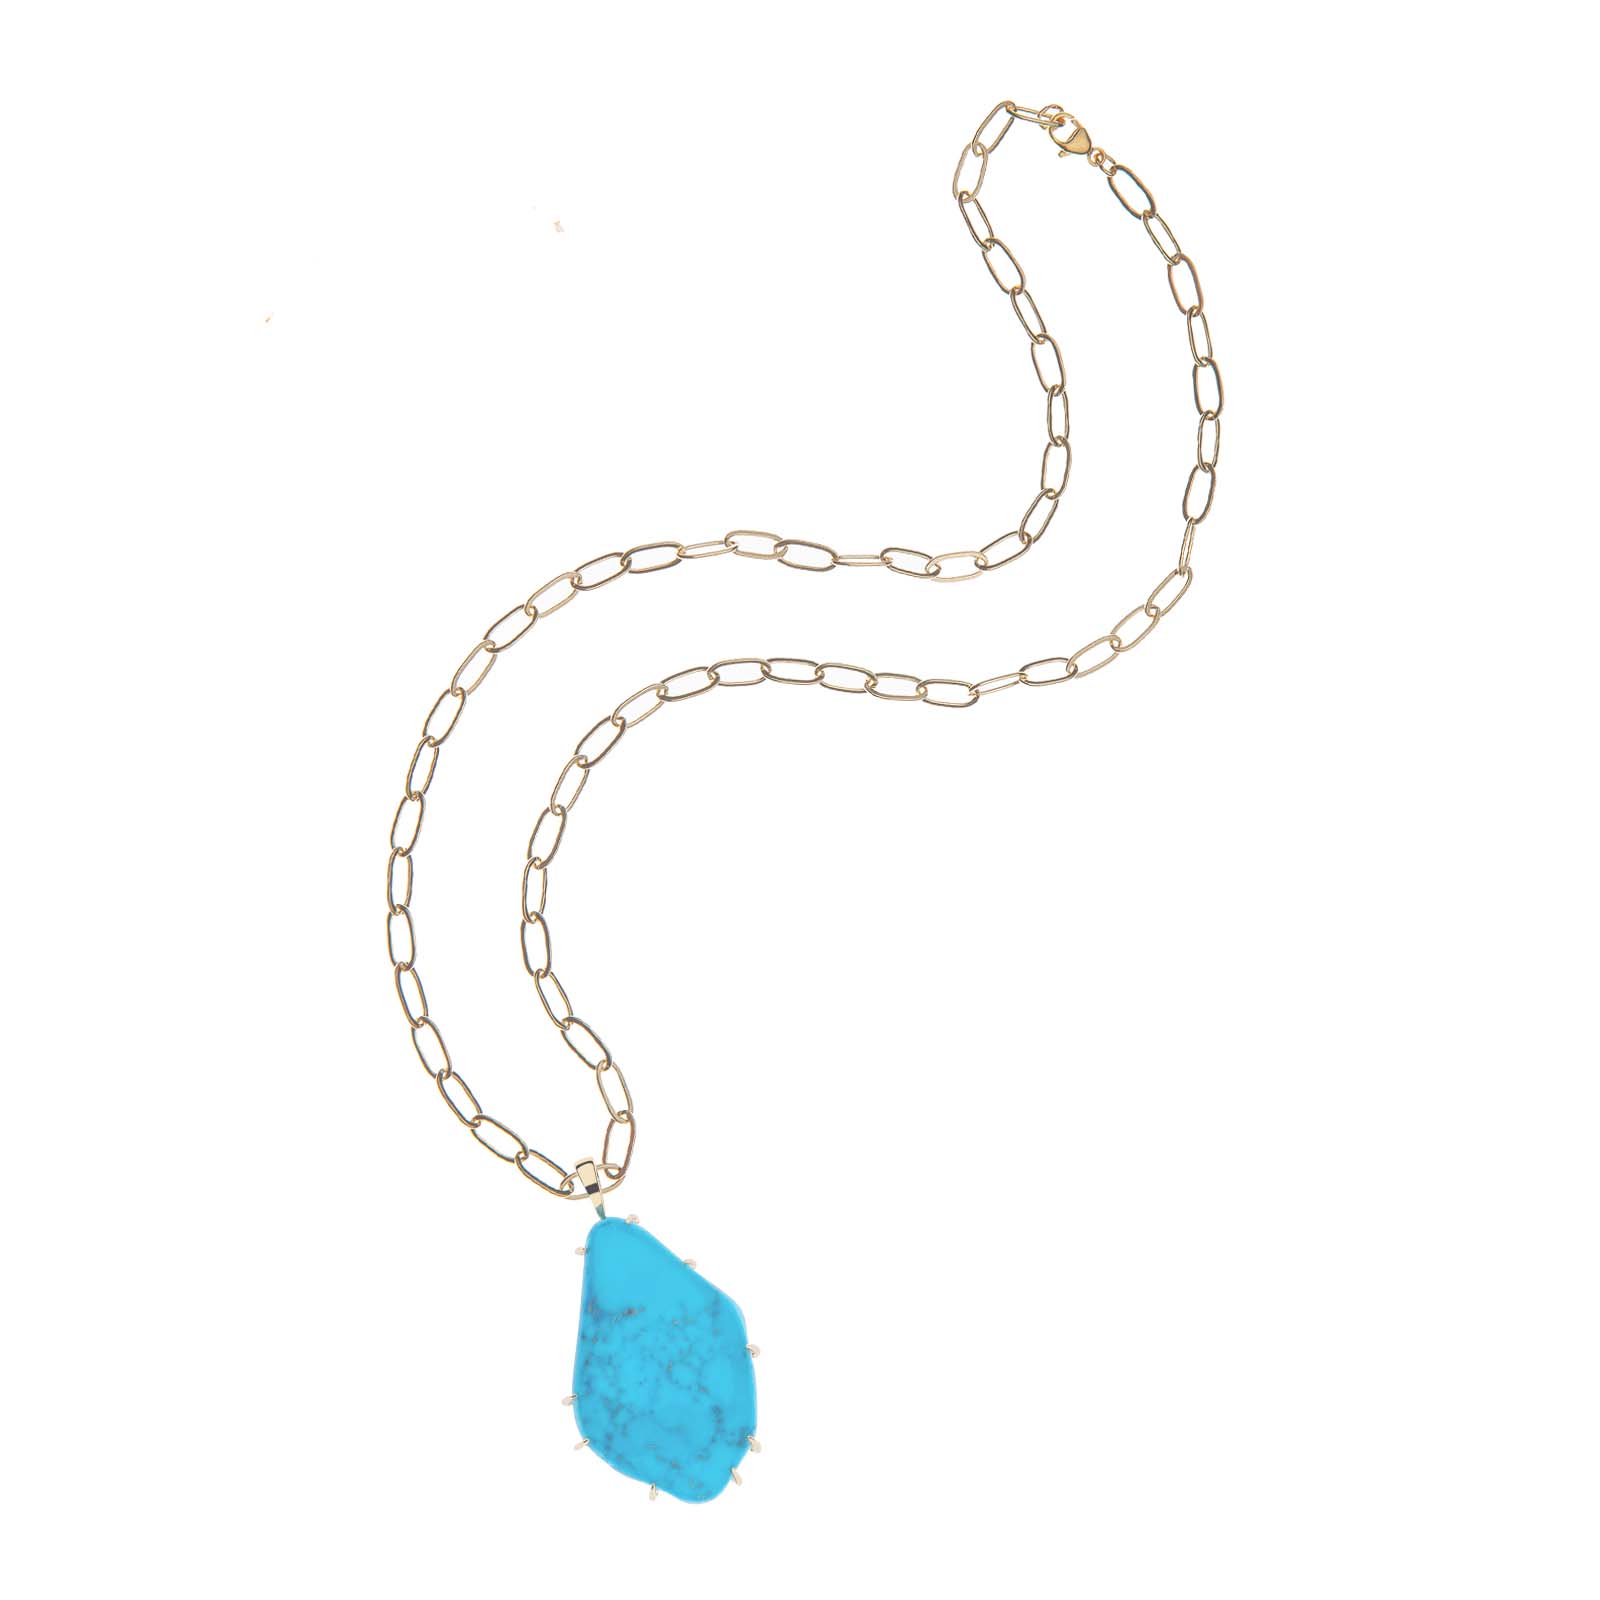 Jane Win LUCKY Turquoise Nugget Pendant Necklace